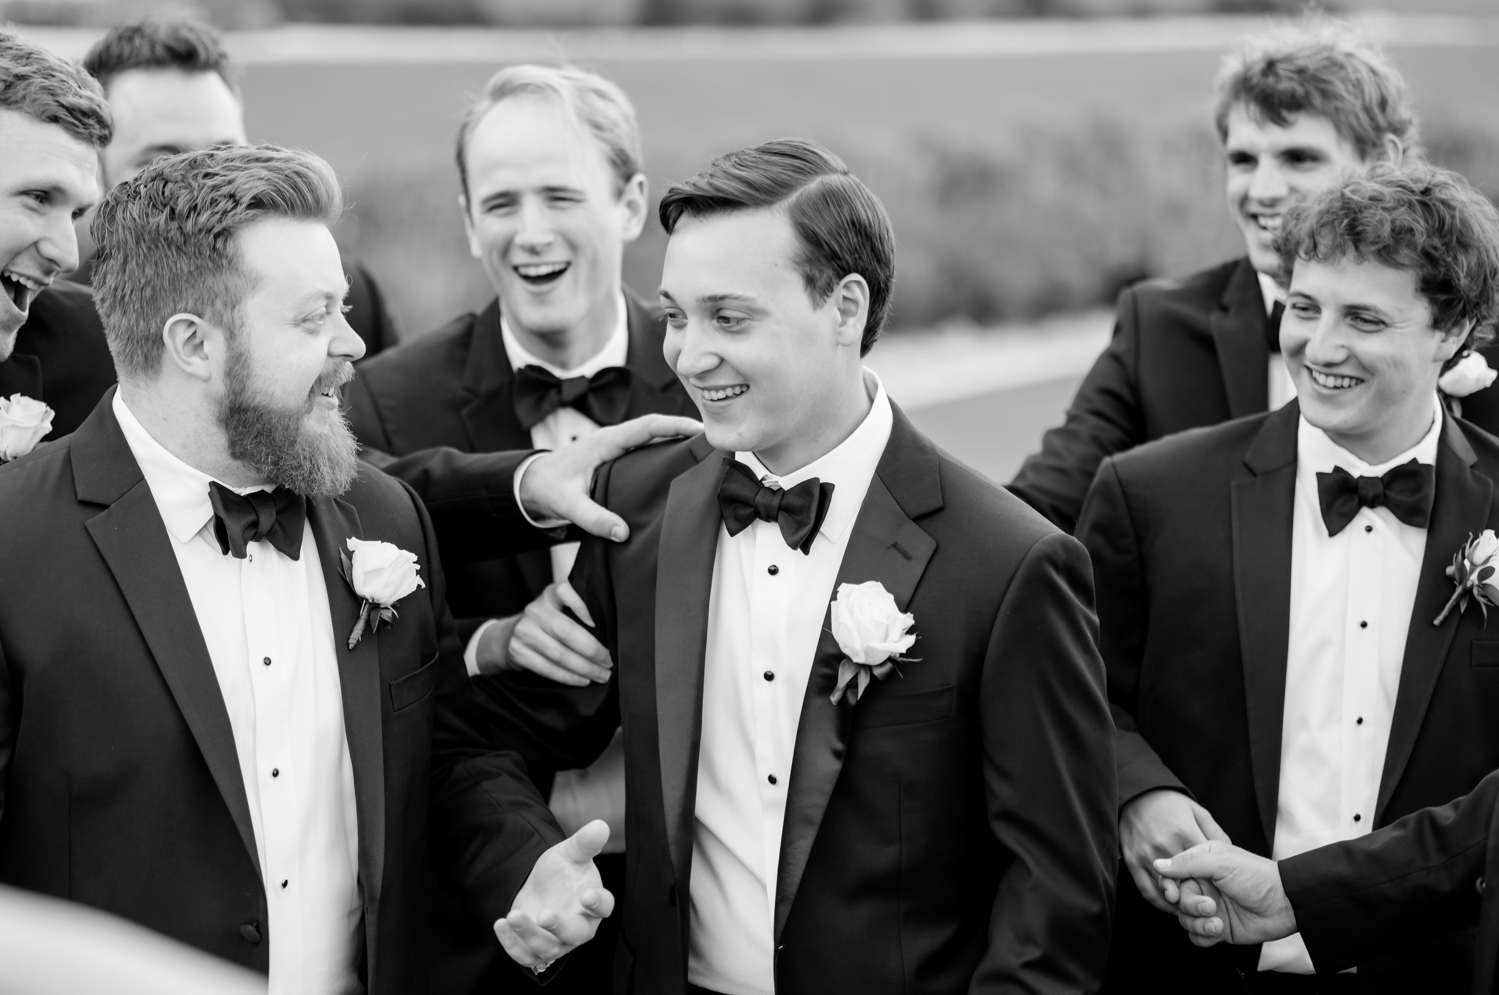 The groomsmen surround the groom and hype him up before the wedding.